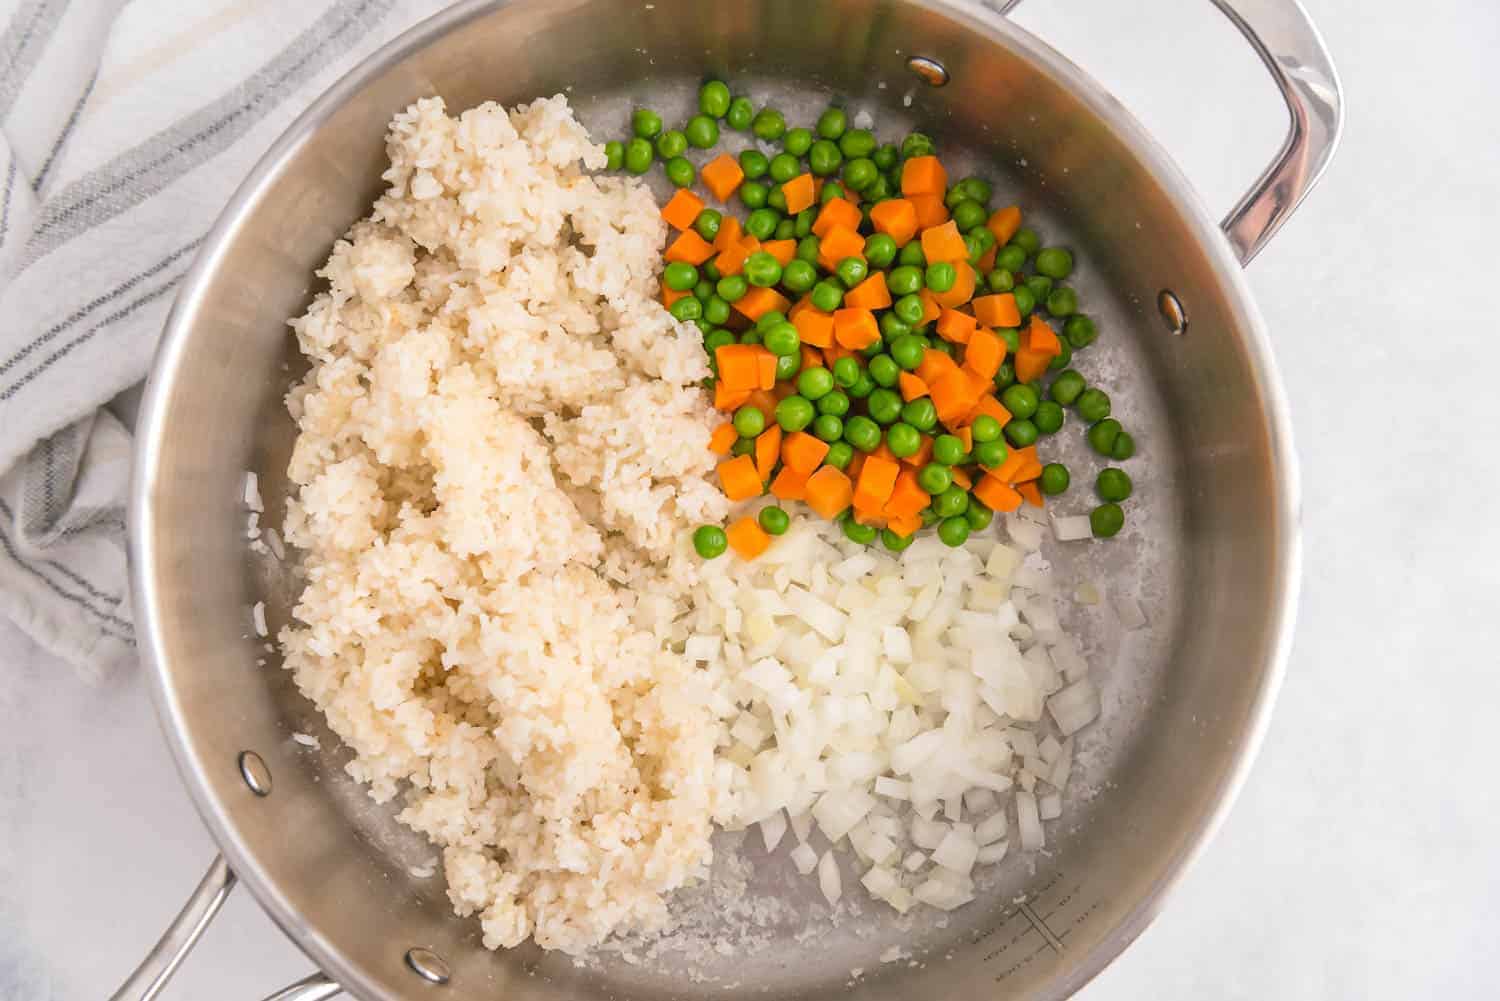 Rice on one side of a pan, green peas, carrots, and onions on the other side.